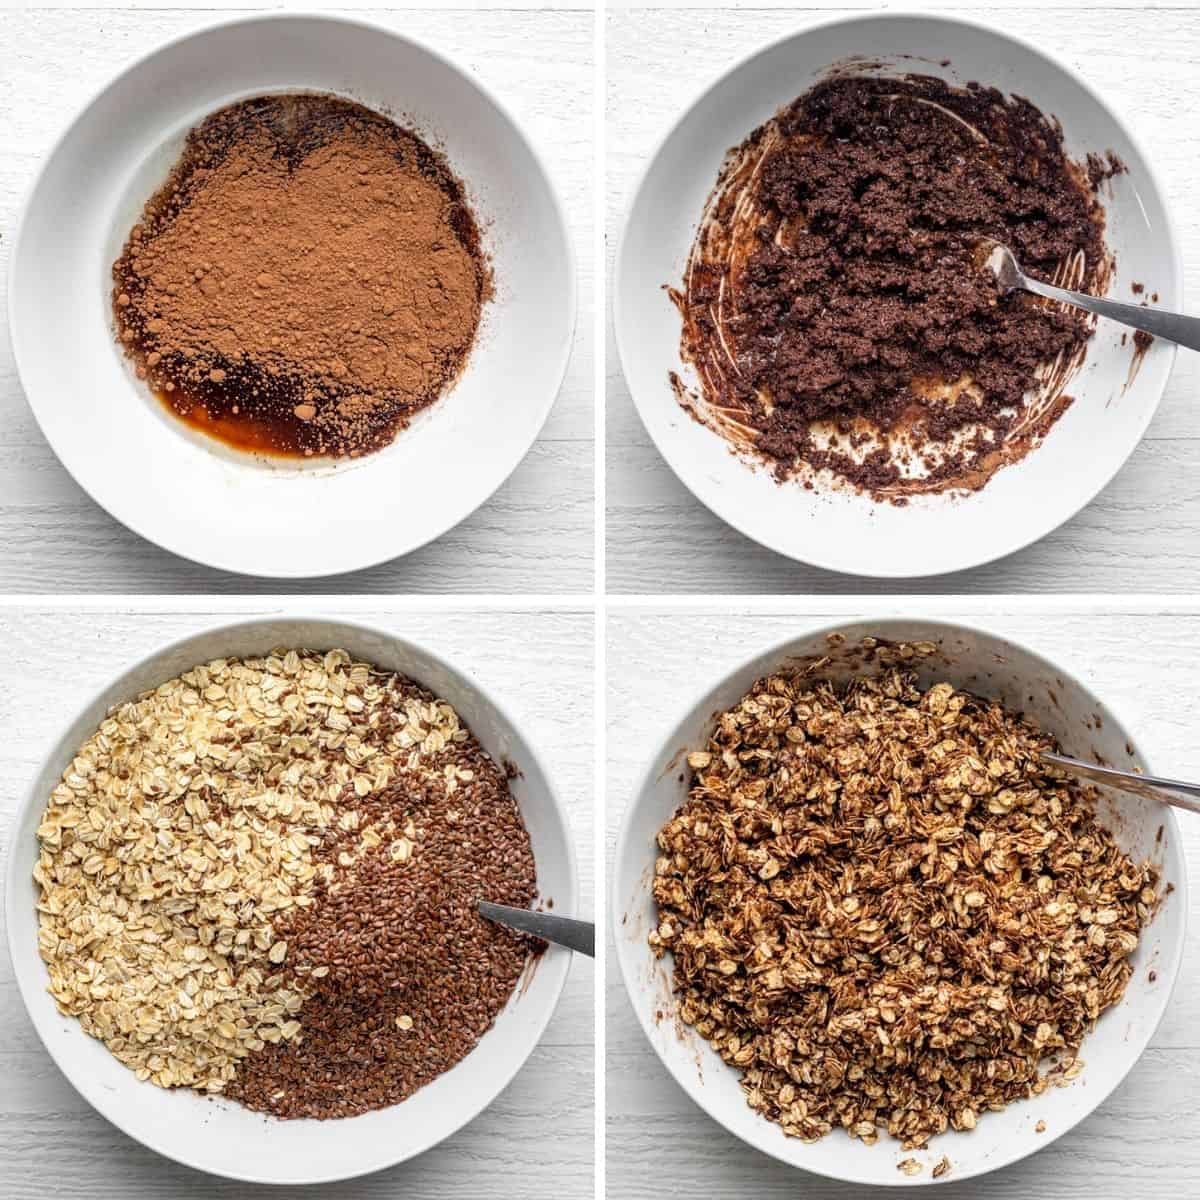 4 image collage to show how to make the ingredients step-by-step in a large white bowl